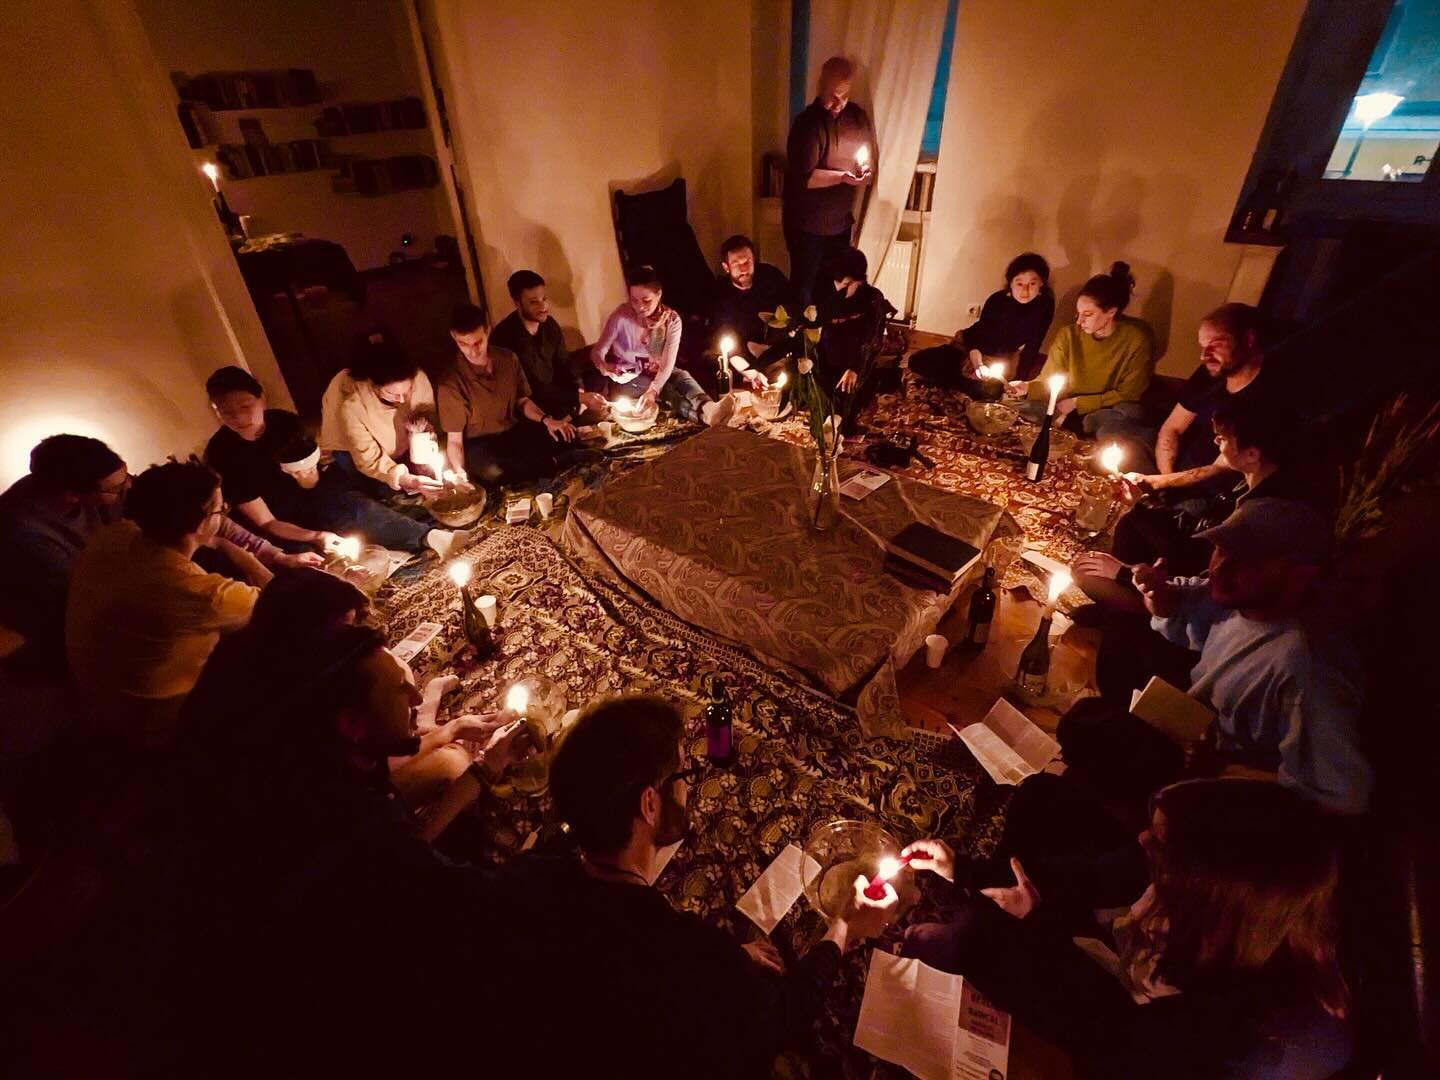 Glimpses from our last SHIUR event in Berlin&mdash;

Understanding the features of darkness helps reveal the light&mdash;and that&rsquo;s what we did at SHIUR Radical Roots: we delved into the sources of contemporary antisemitism focusing on the stru